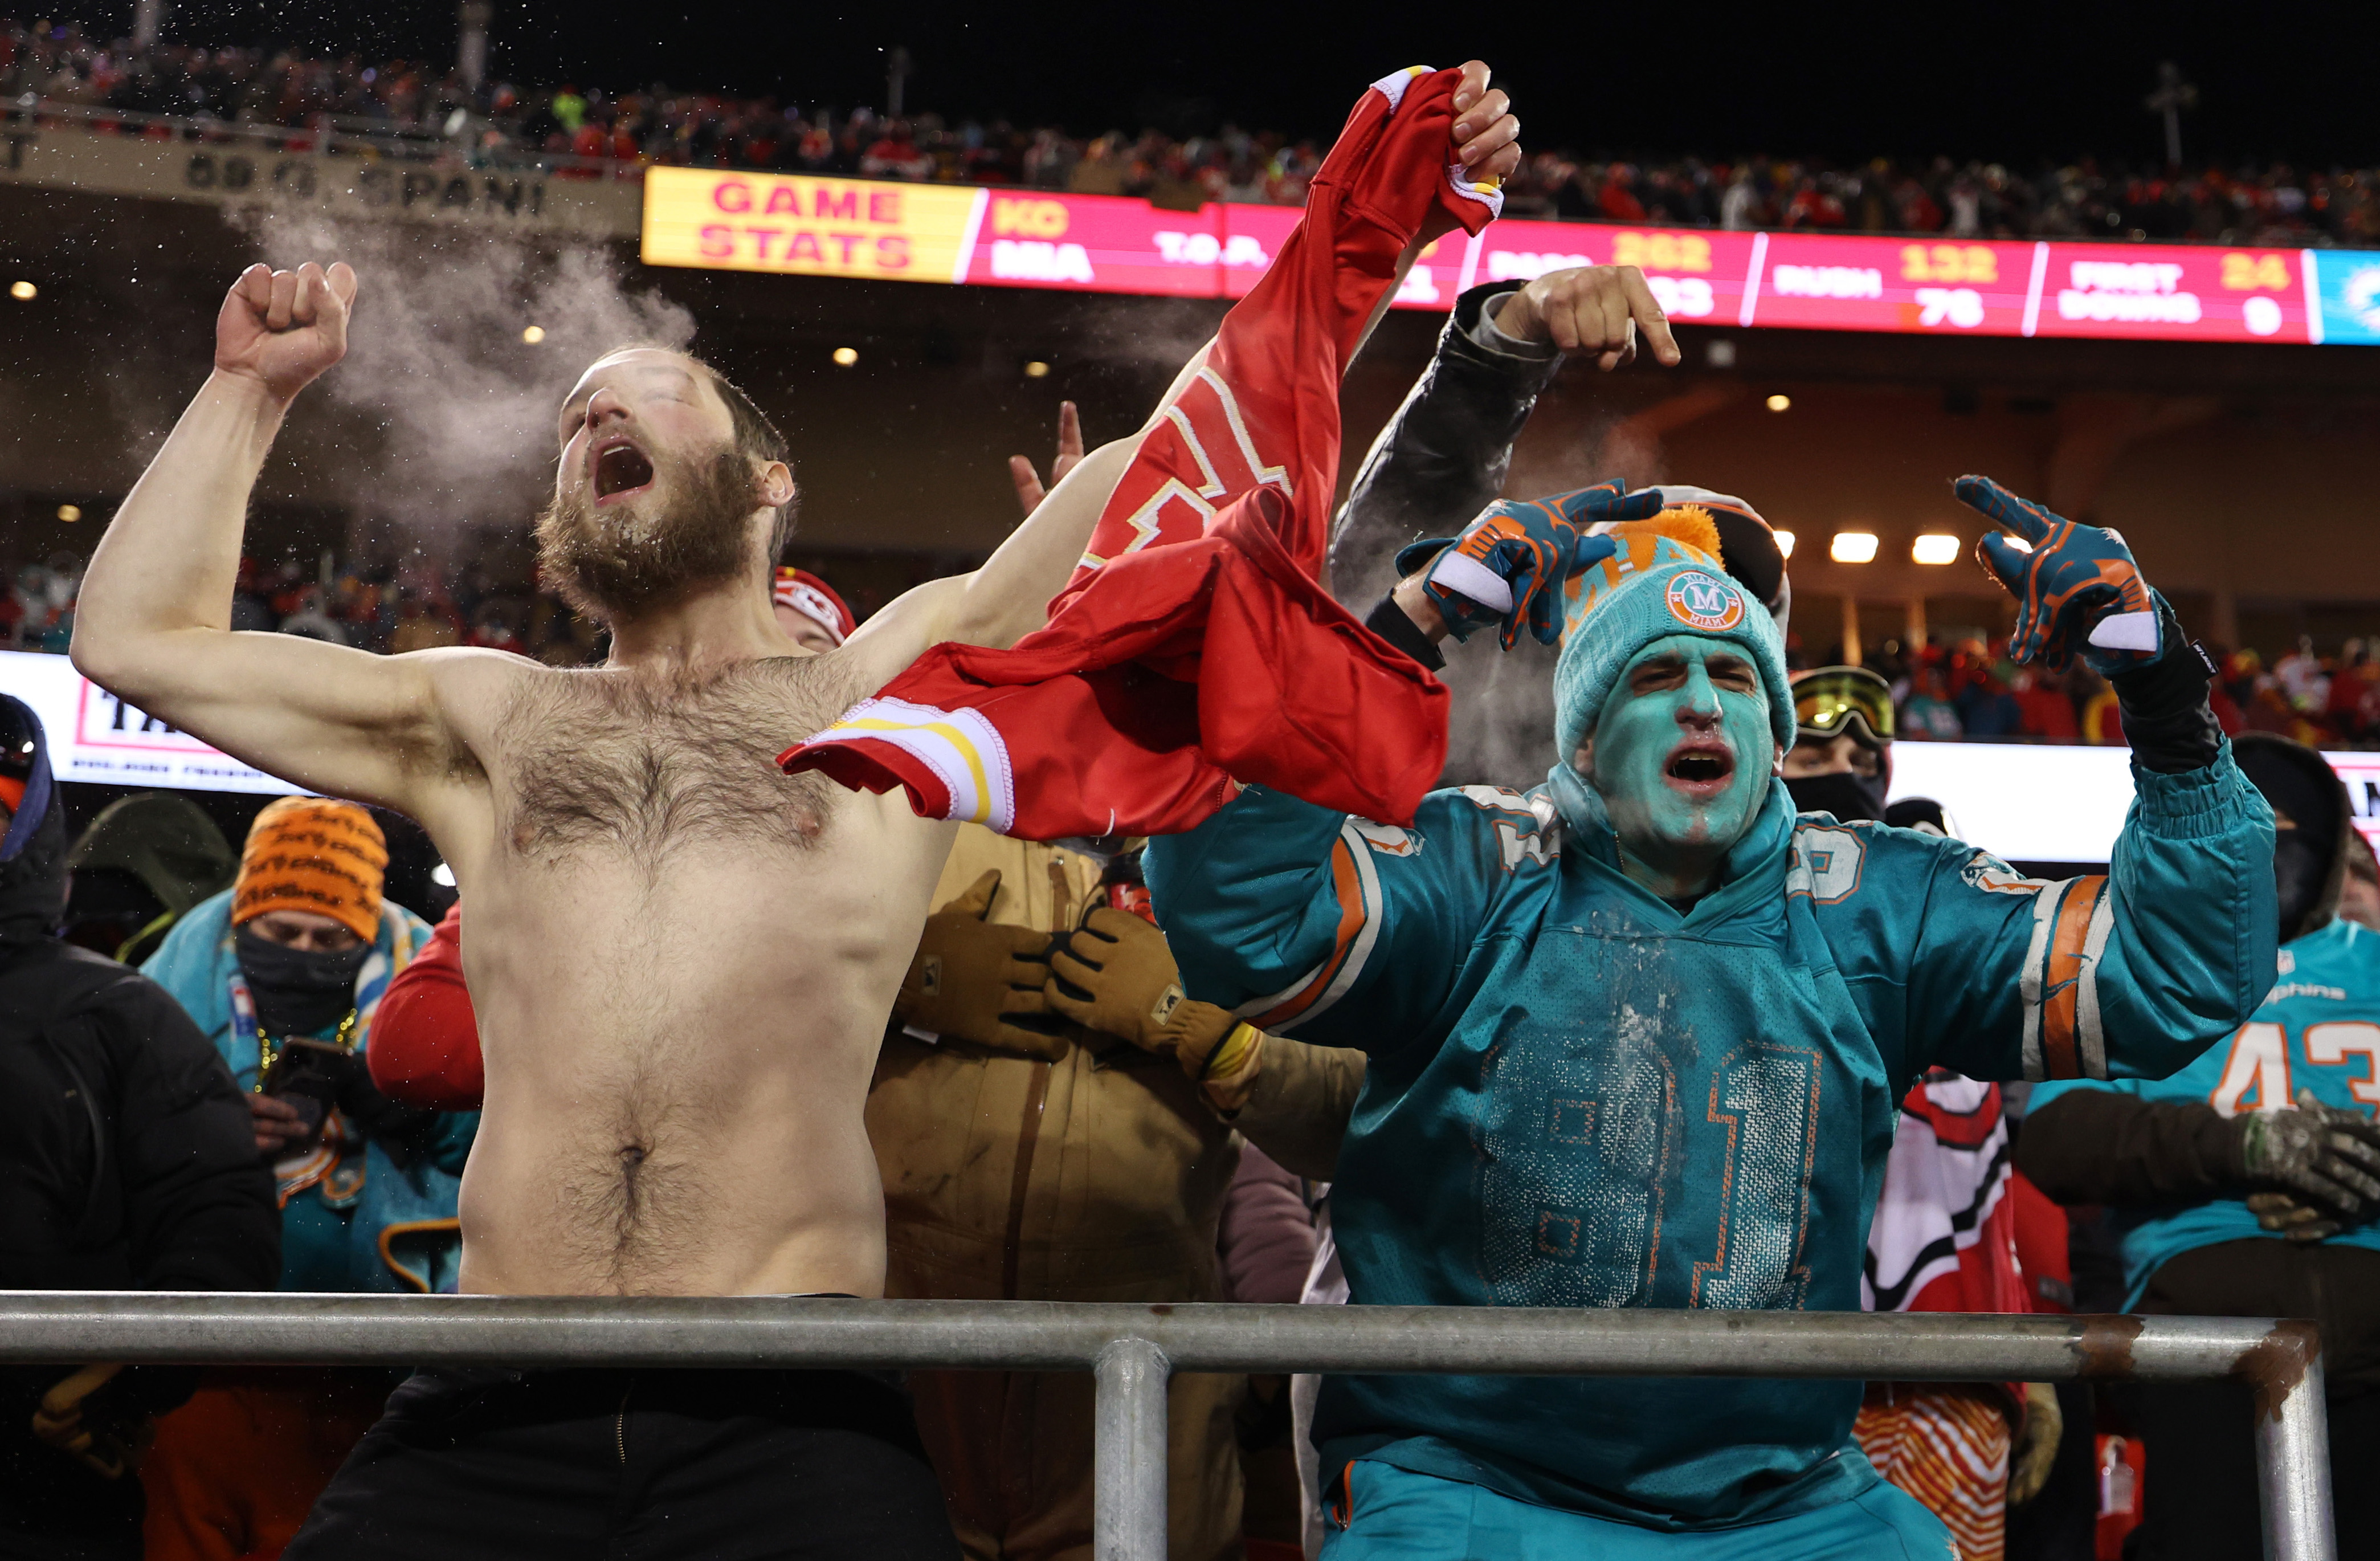 Dolphins-Chiefs playoff game on Peacock sets streaming record with average  of 23 million viewers